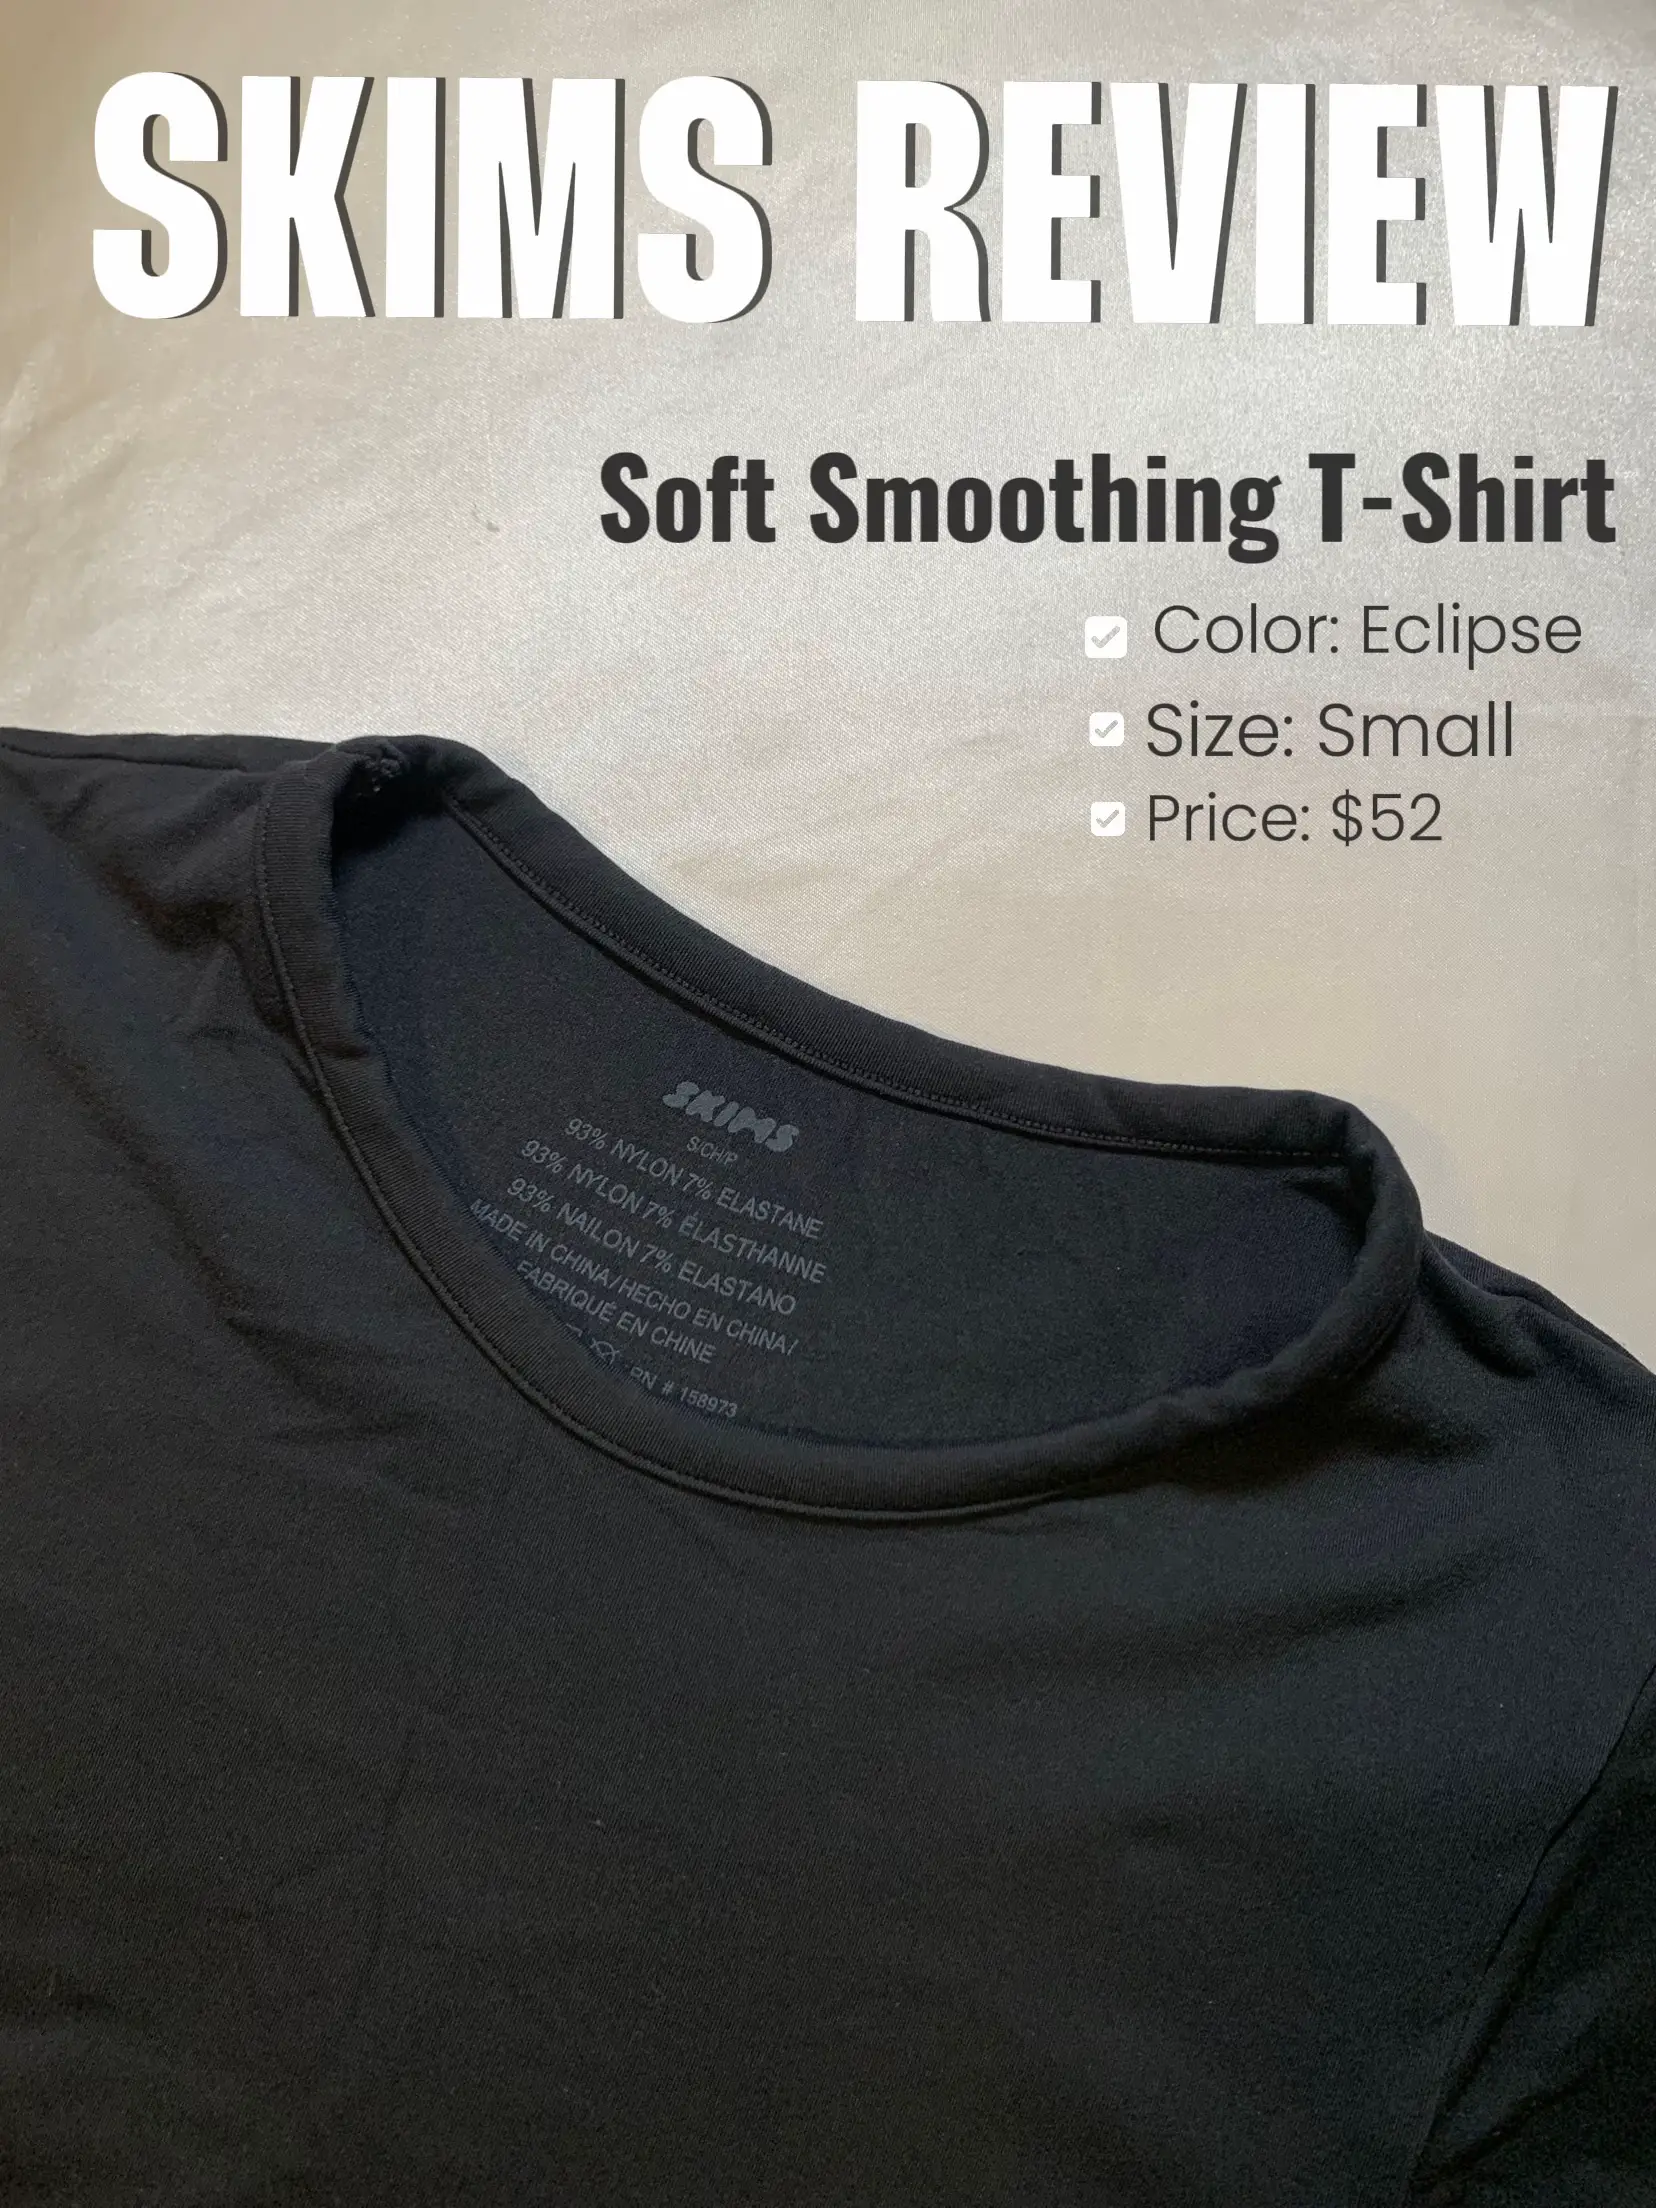 Fit to wear: Soft Smoothing T-Shirt from Skims! #skimsreview